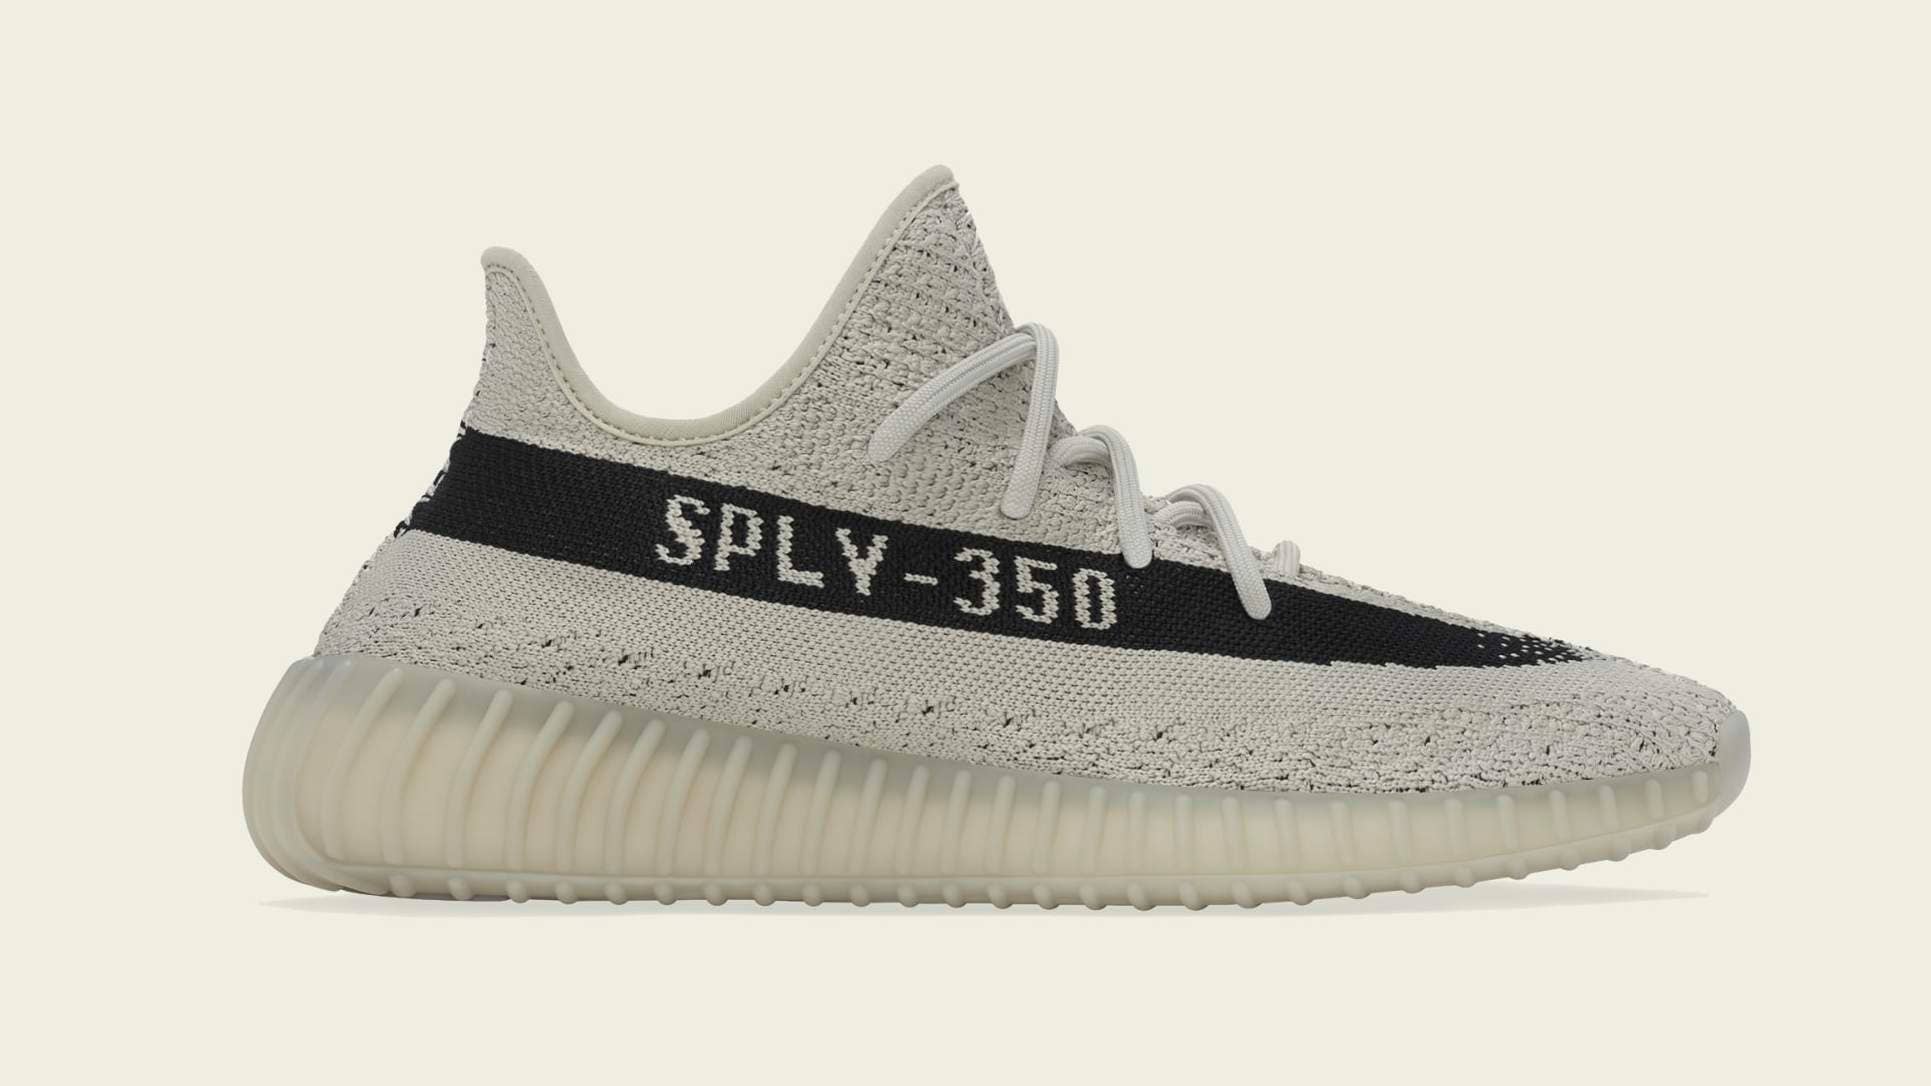 Adidas Yeezy Boost 350 V2 'Slate' HP7870 Lateral